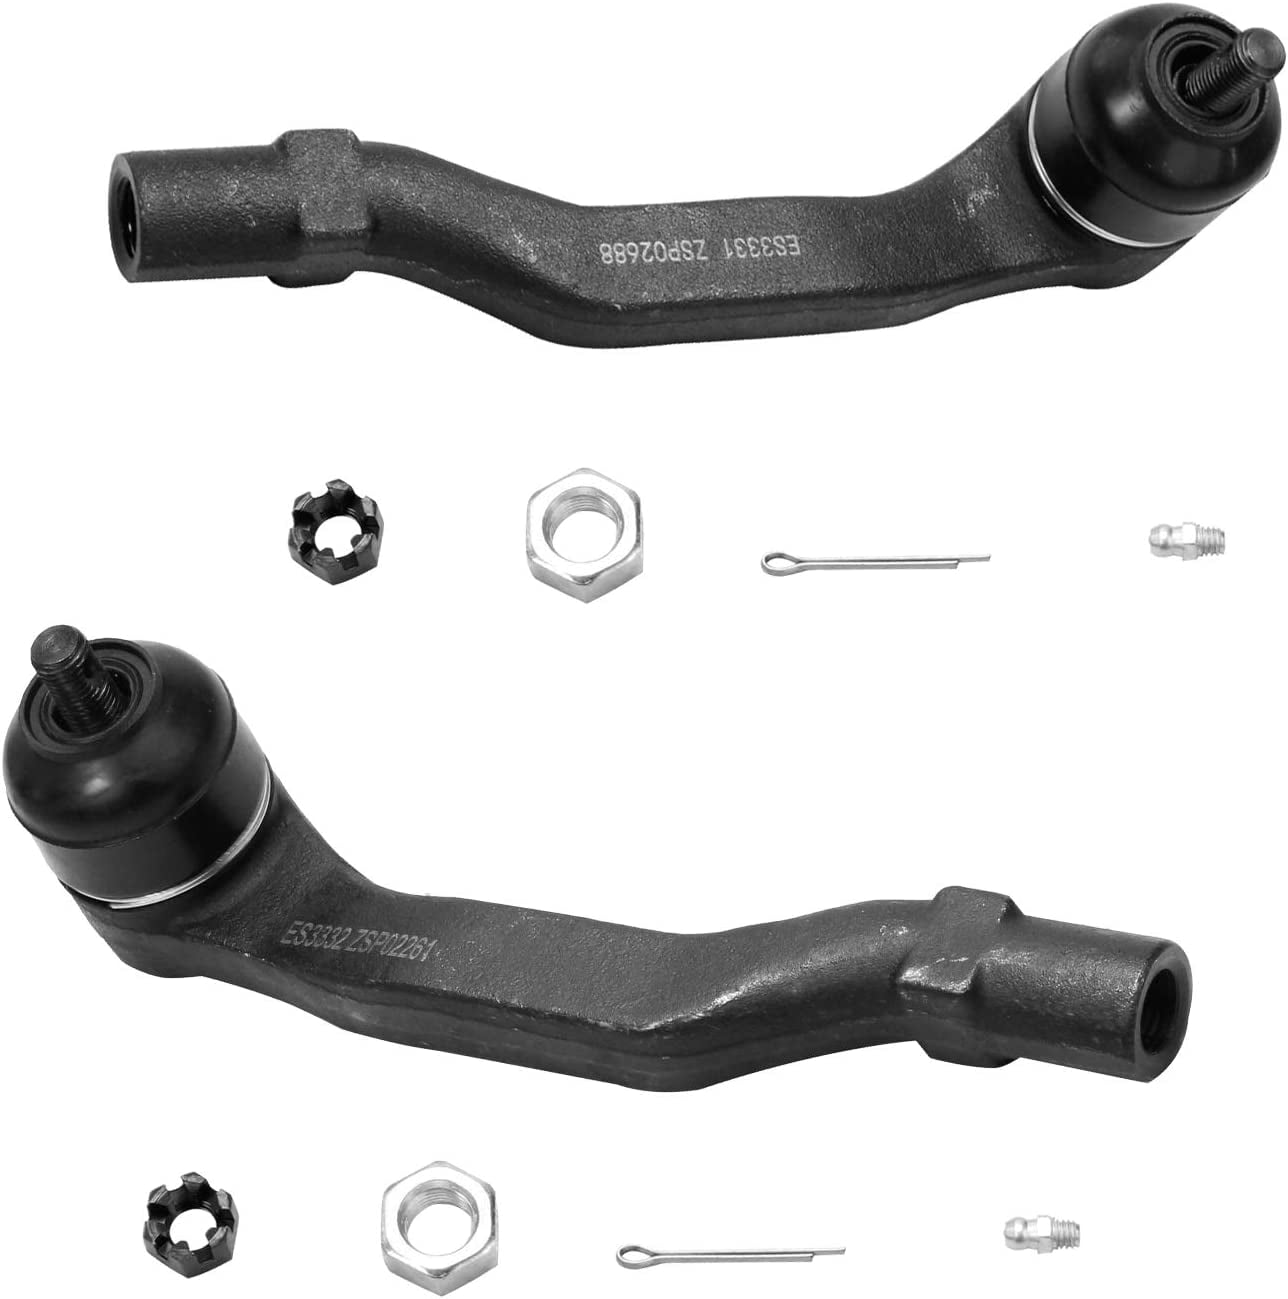 1994-2001 Acura Integra Sway Bar Links and Ball Joints 1992-1995 Honda Civic No Si - 93-97 Civic Del Sol Detroit Axle -12pc Front Upper Control Arms Inner & Outer Tie Rod Ends w/Rack Boots 